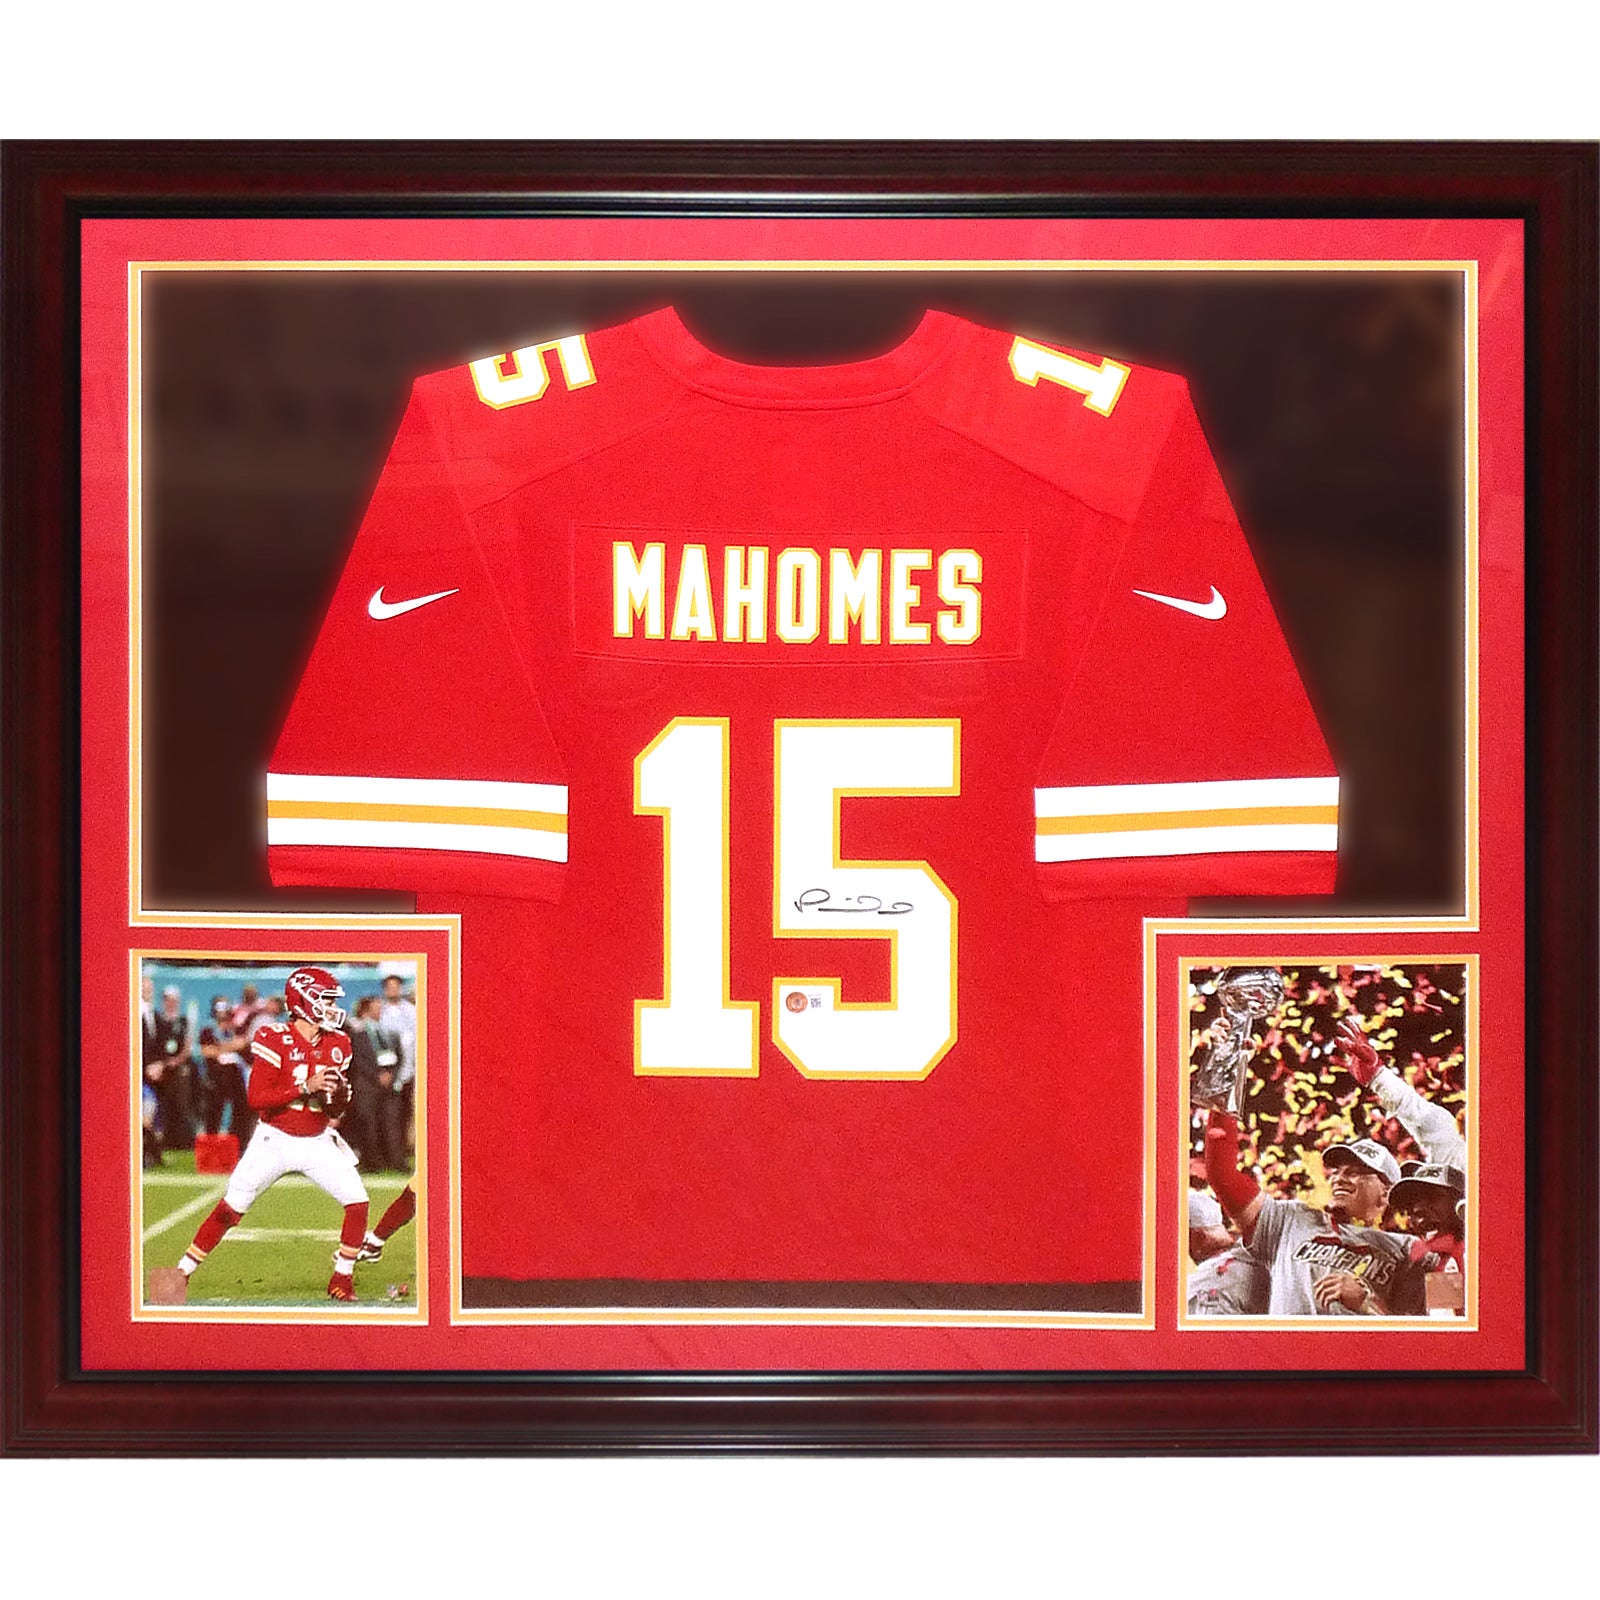 Patrick Mahomes Autographed Kansas City Chiefs (Red #15 NIKE) Deluxe Framed Jersey - JSA